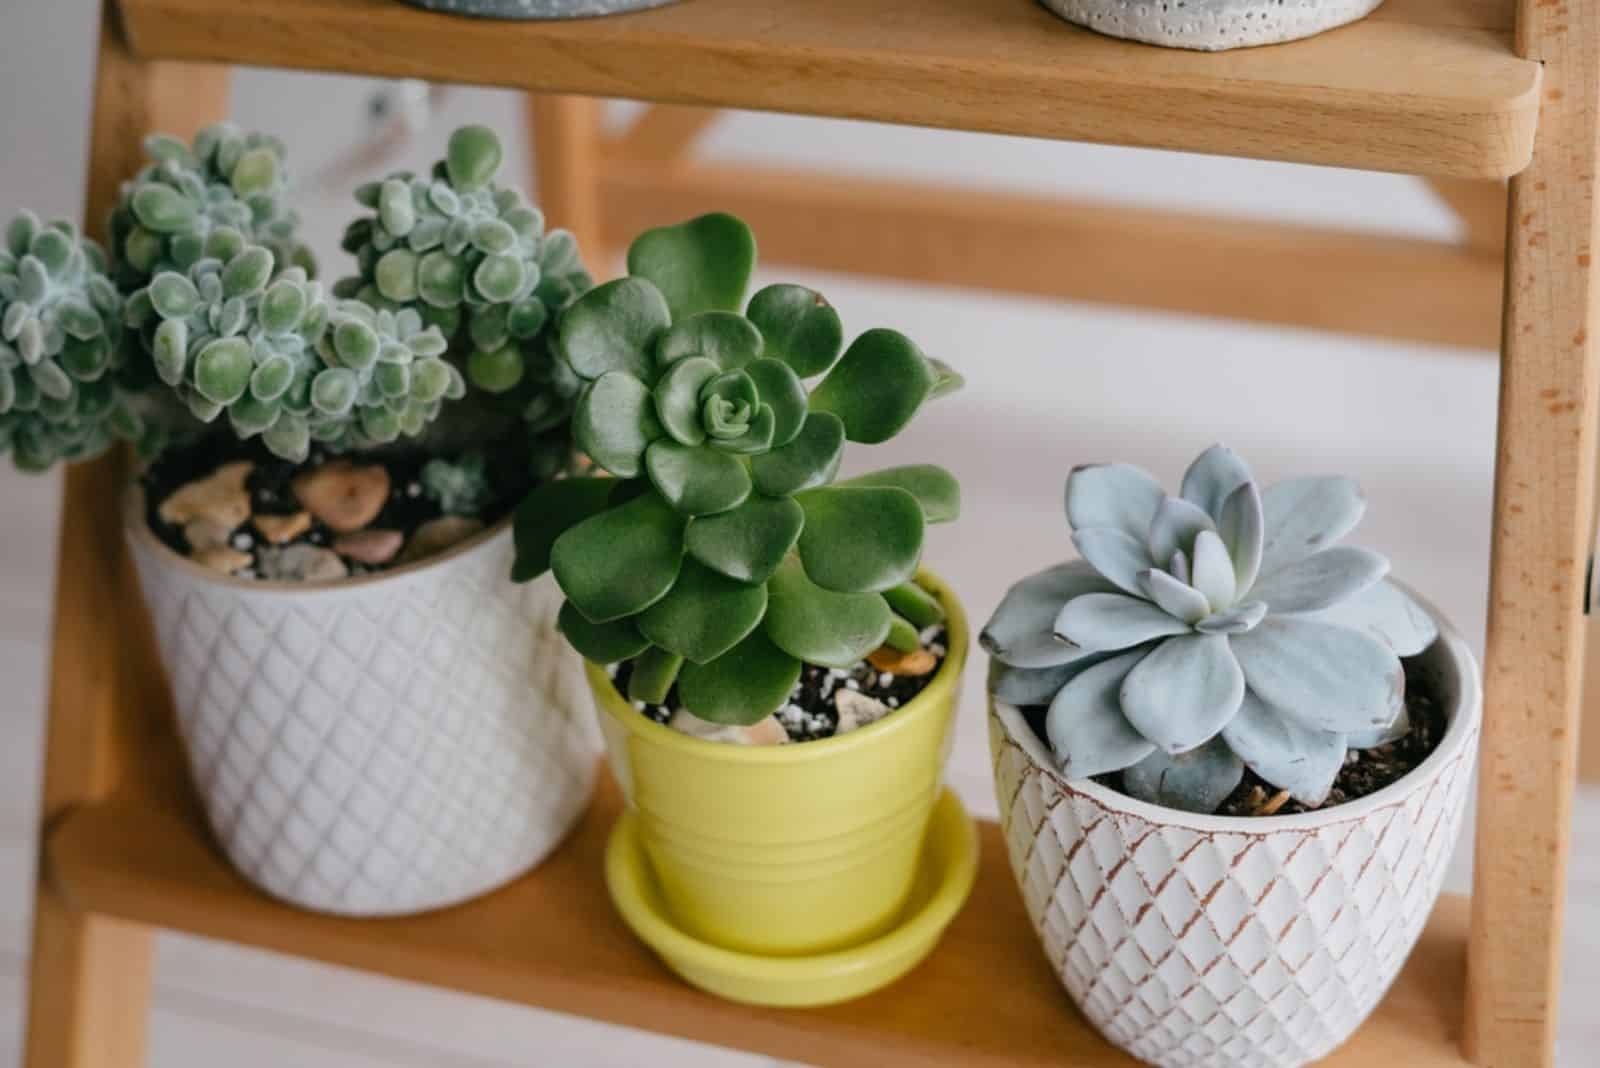 indoor plants stand on a wooden shelf